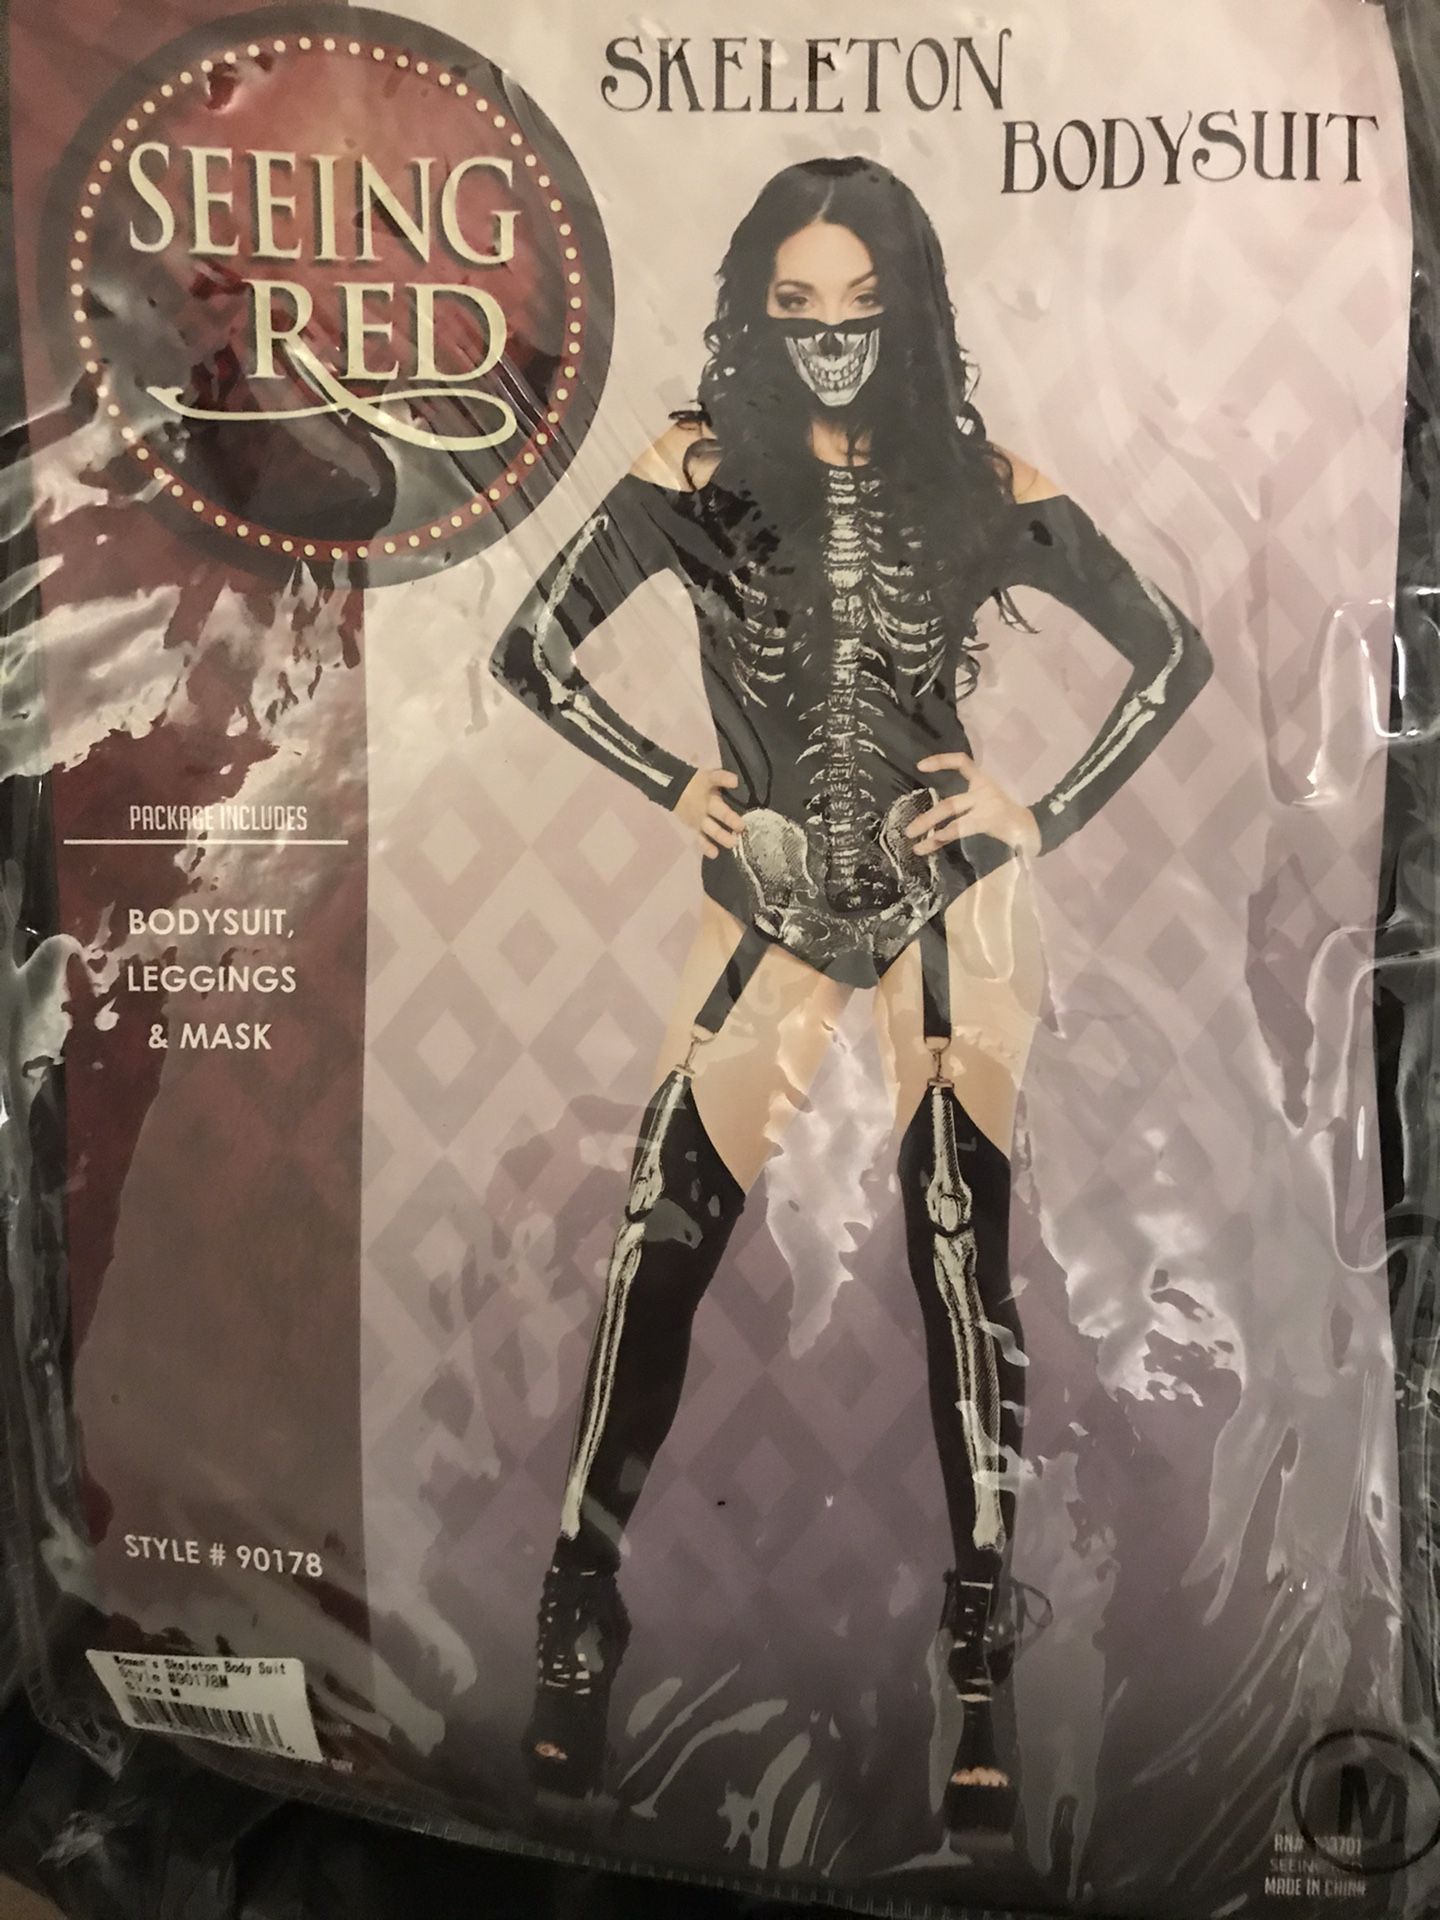 Sexy skeleton costume body suit size is M.